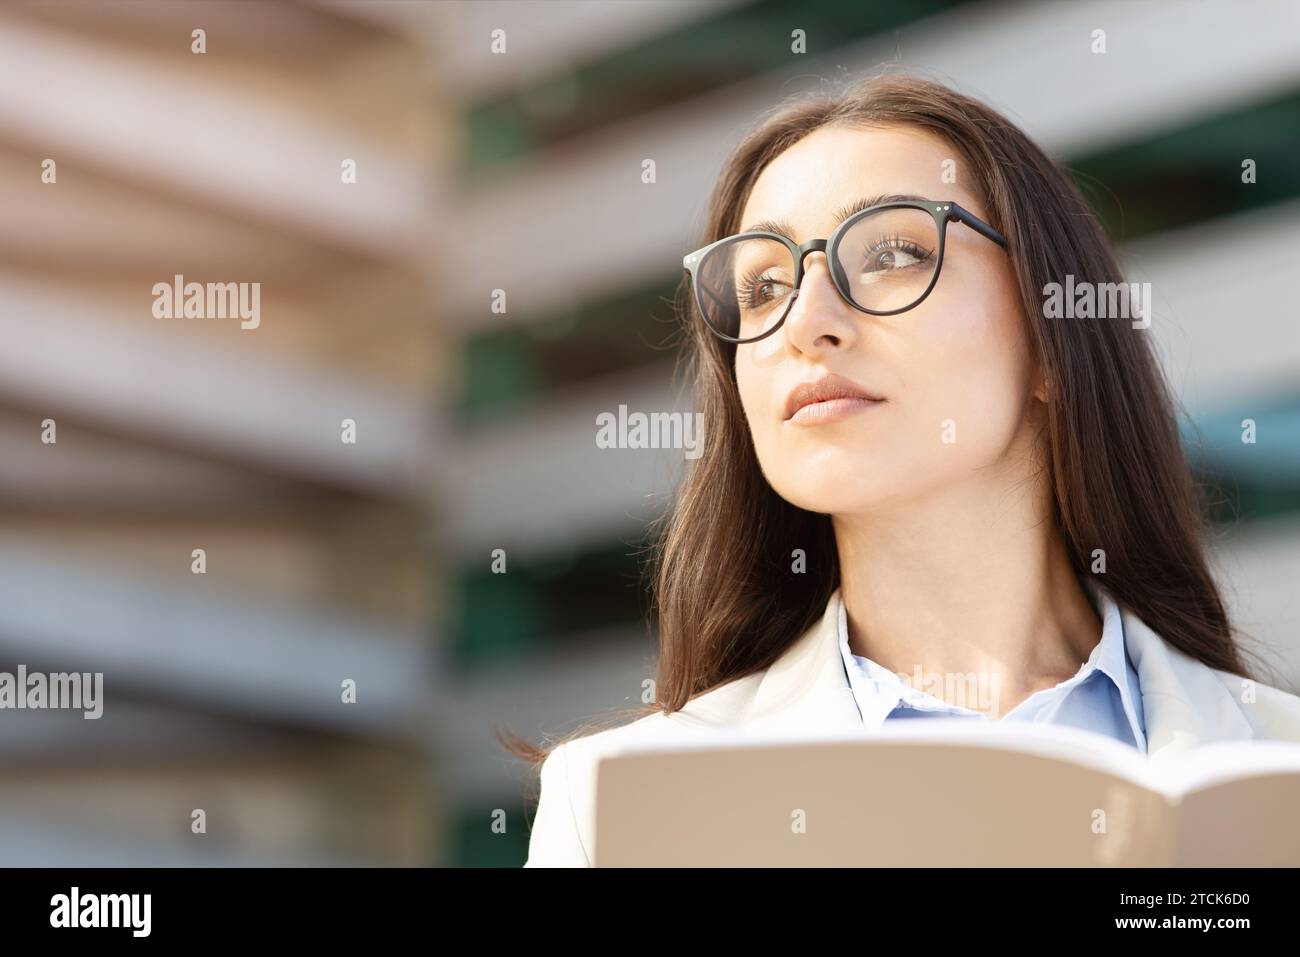 Thoughtful european millennial woman in glasses looks upward, holding open book, paper project Stock Photo